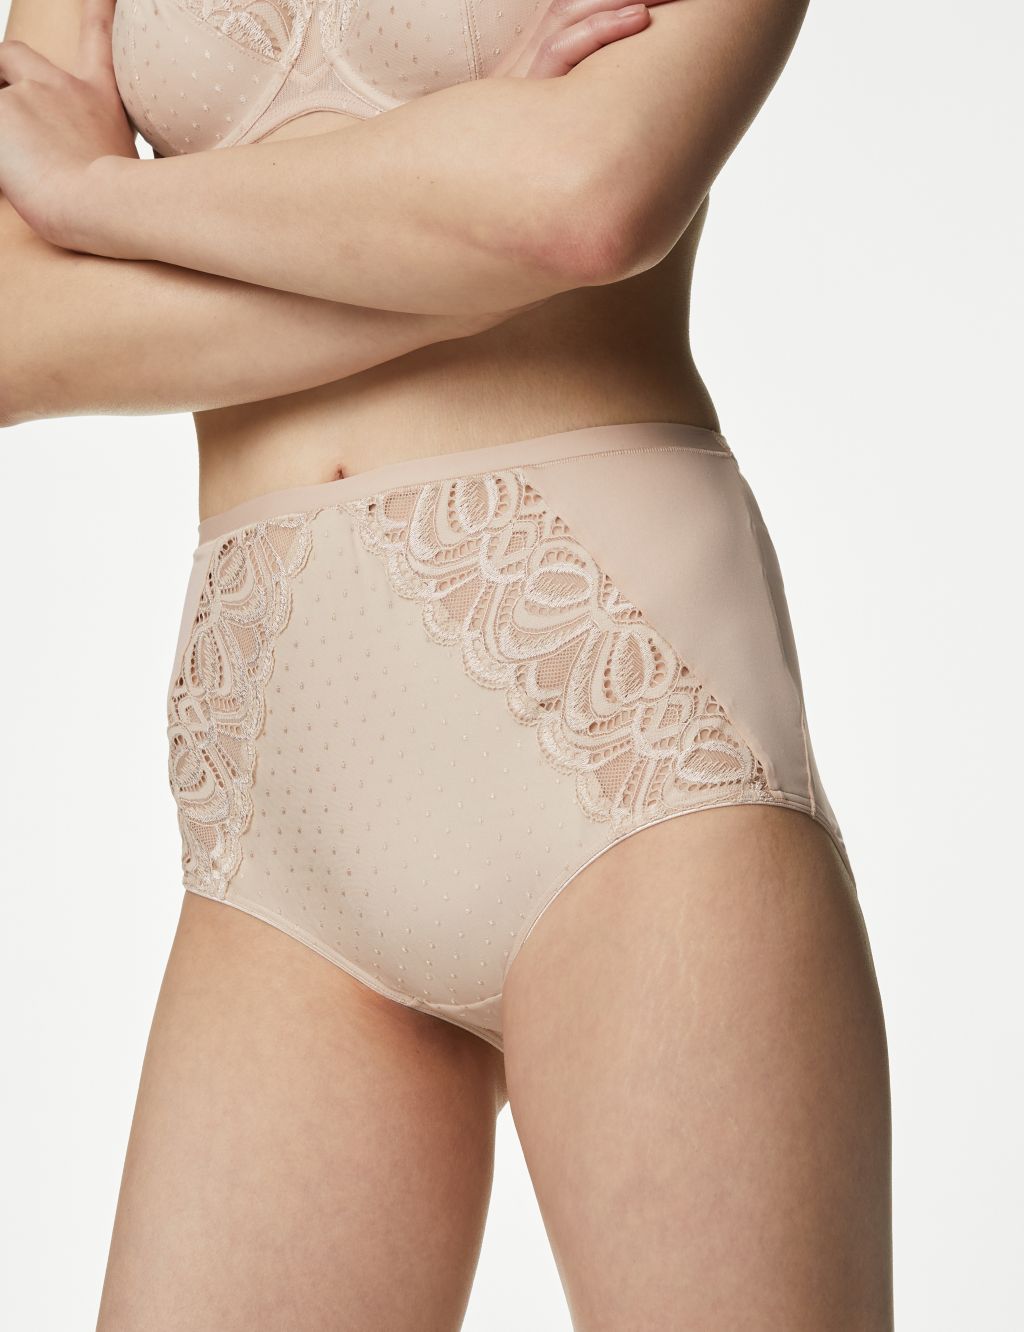 3pk Iconic Lace Full Briefs image 3